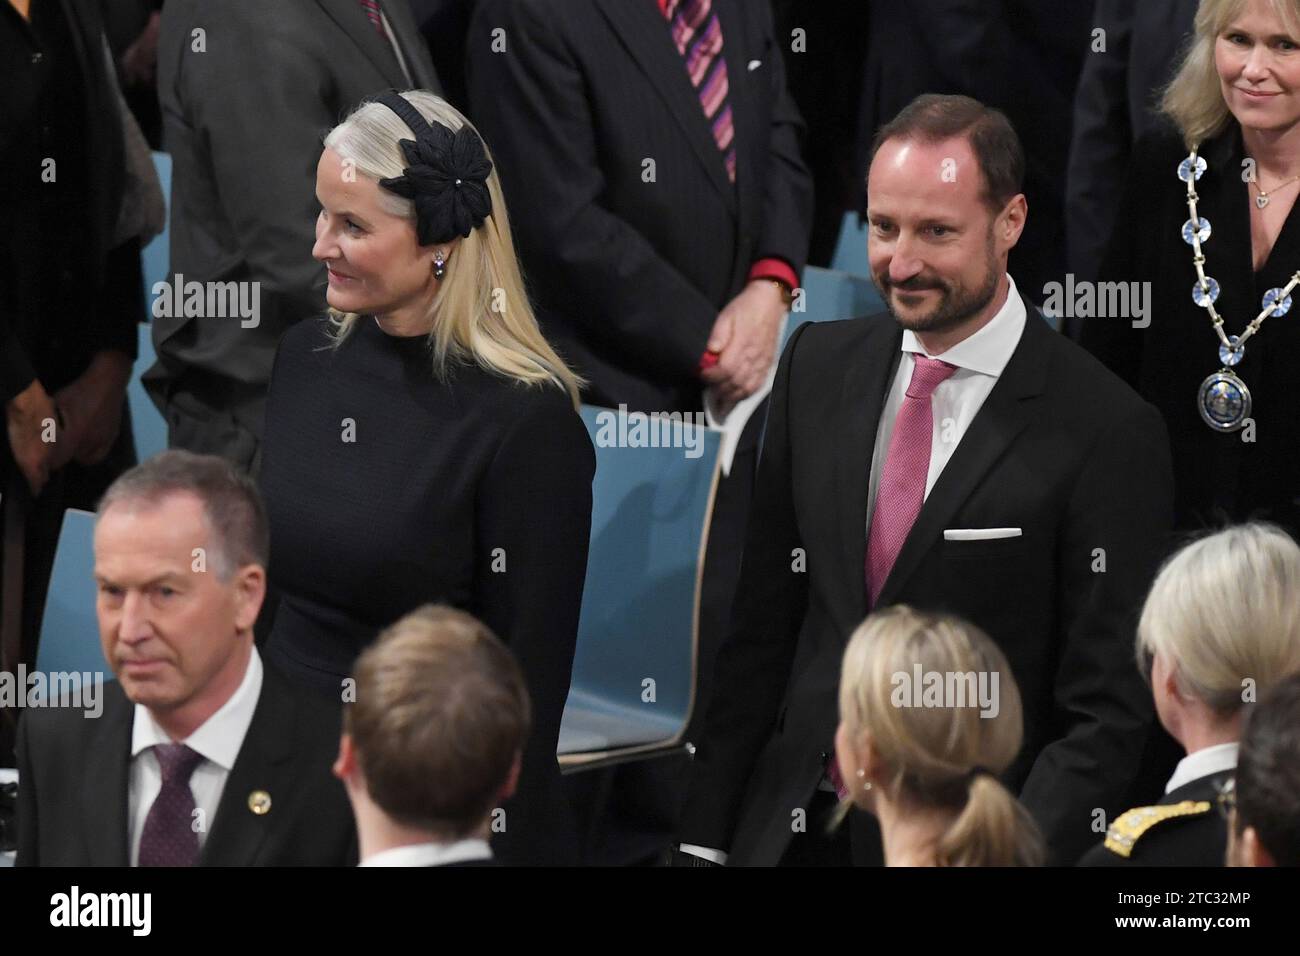 Oslo, Norway. 10th Dec, 2023. Crown Prince Haakon and Crown Princess Mette-Marit attend The Nobel Peace Prize ceremony for Iranian activist Narges Mohammadi at the Nobel Institute in Oslo, Norway. 2023 Nobel Peace Prize winner Narges Mohammadi is imprisoned and is therefore represented by her family. Mohammadi receives the peace prize for her fight against the oppression of women in Iran and the fight for human rights and freedom for all. December 10, 2023. Photo by Paul Treadway/ Credit: UPI/Alamy Live News Stock Photo